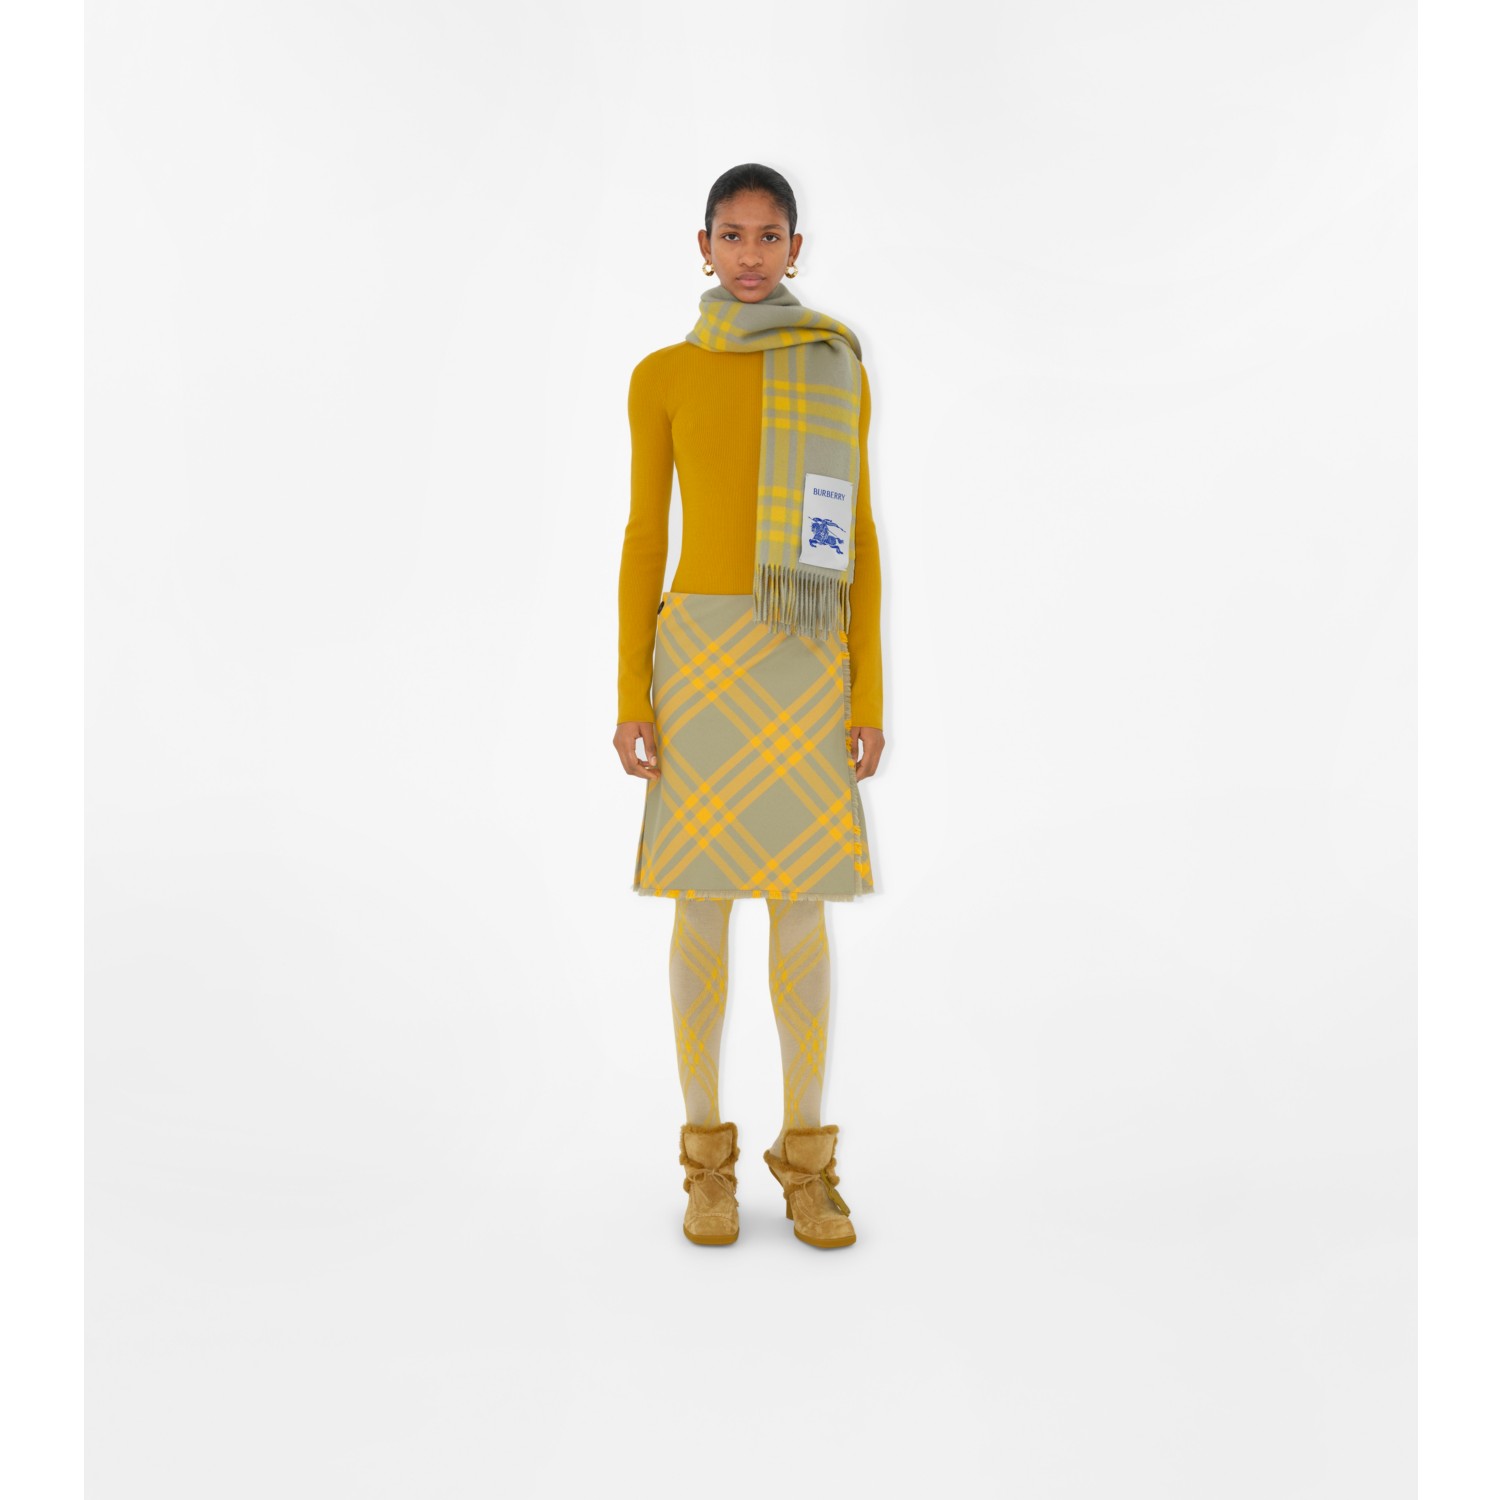 Reversible Check Cashmere Scarf